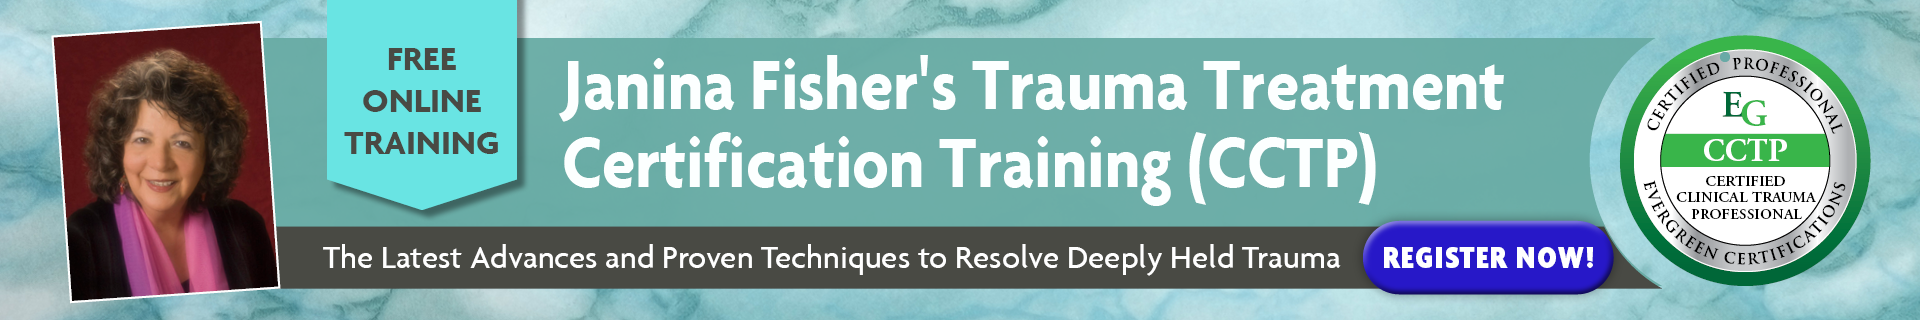 Janina Fisher's Trauma Treatment Certification Training (CCTP): The Latest Advances and Proven Techniques to Resolve Deeply Held Trauma